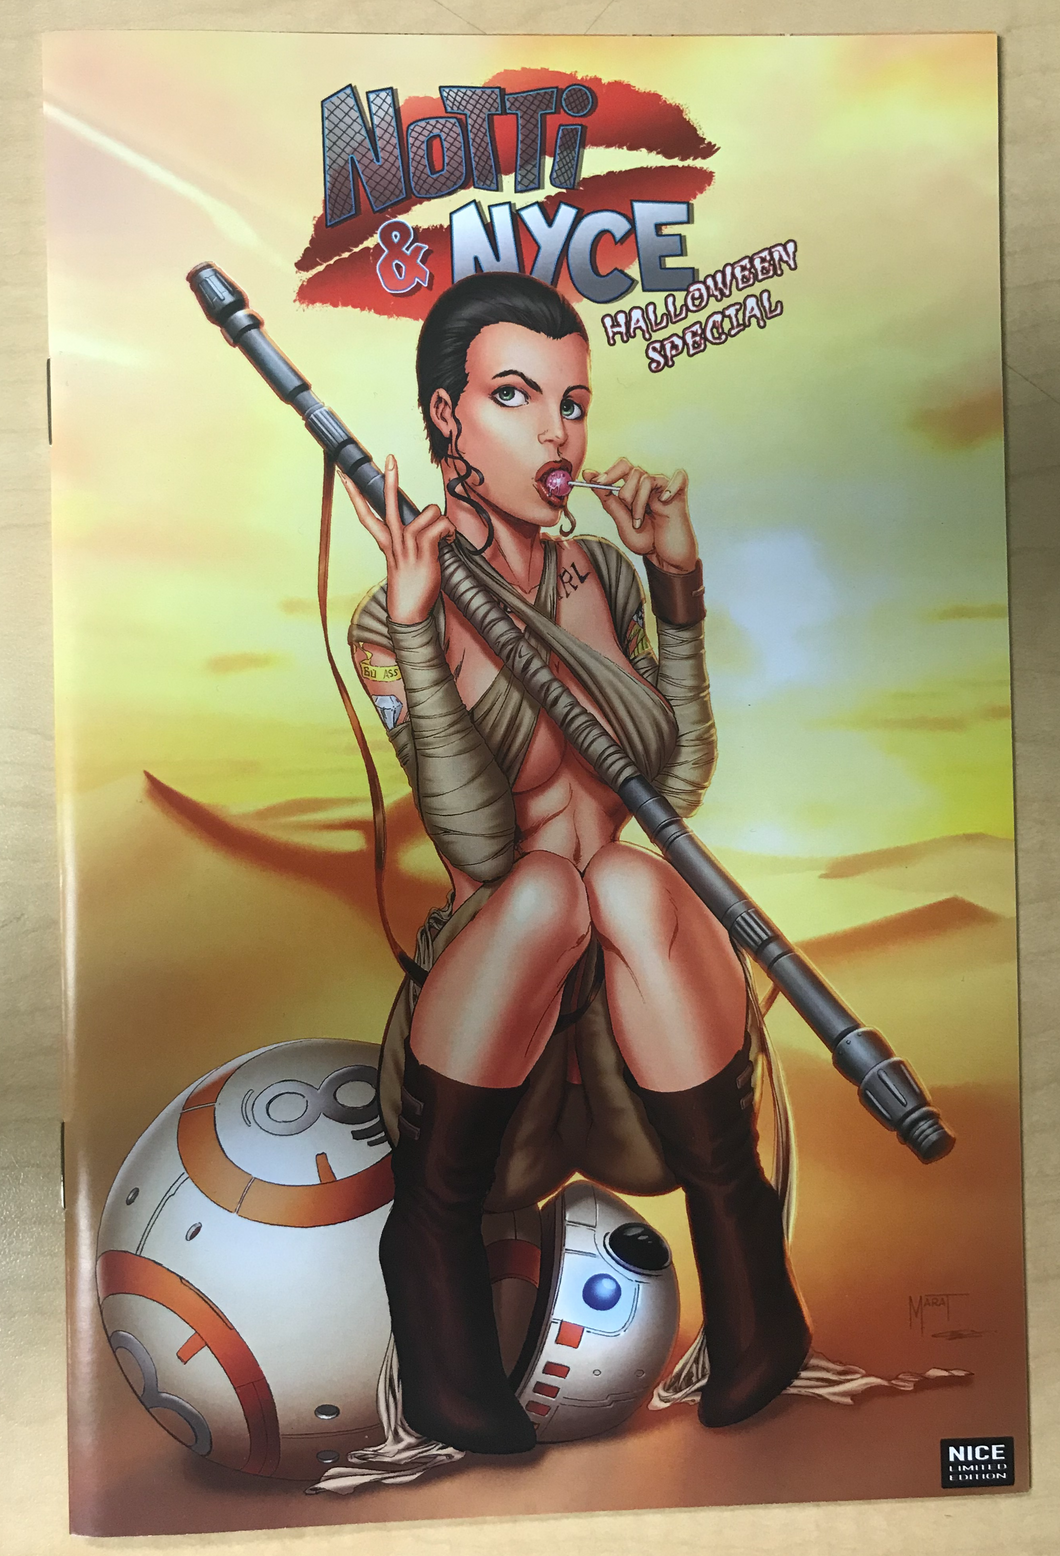 Notti & Nyce: Halloween Special 2018 Rey Skywalker & BB-8 Star Wars Cosplay NICE Variant Cover by Marat Mychaels